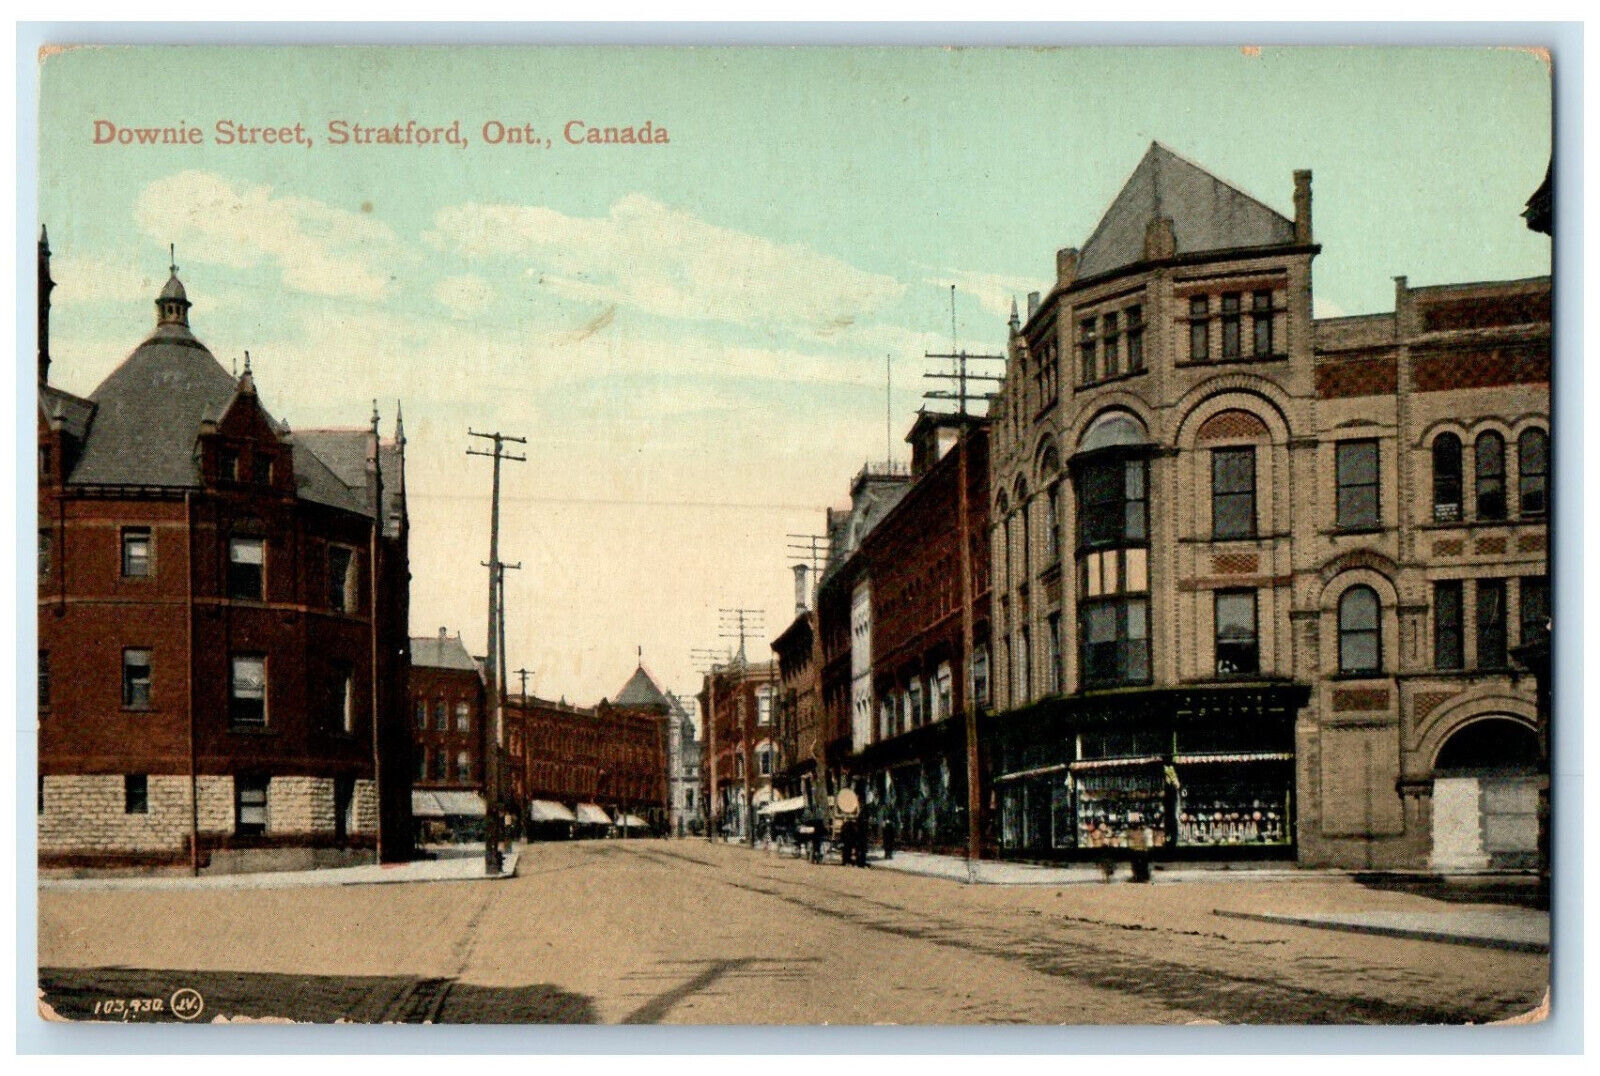 1911 Business Section at Downie Street Stratford Ontario Canada Posted Postcard